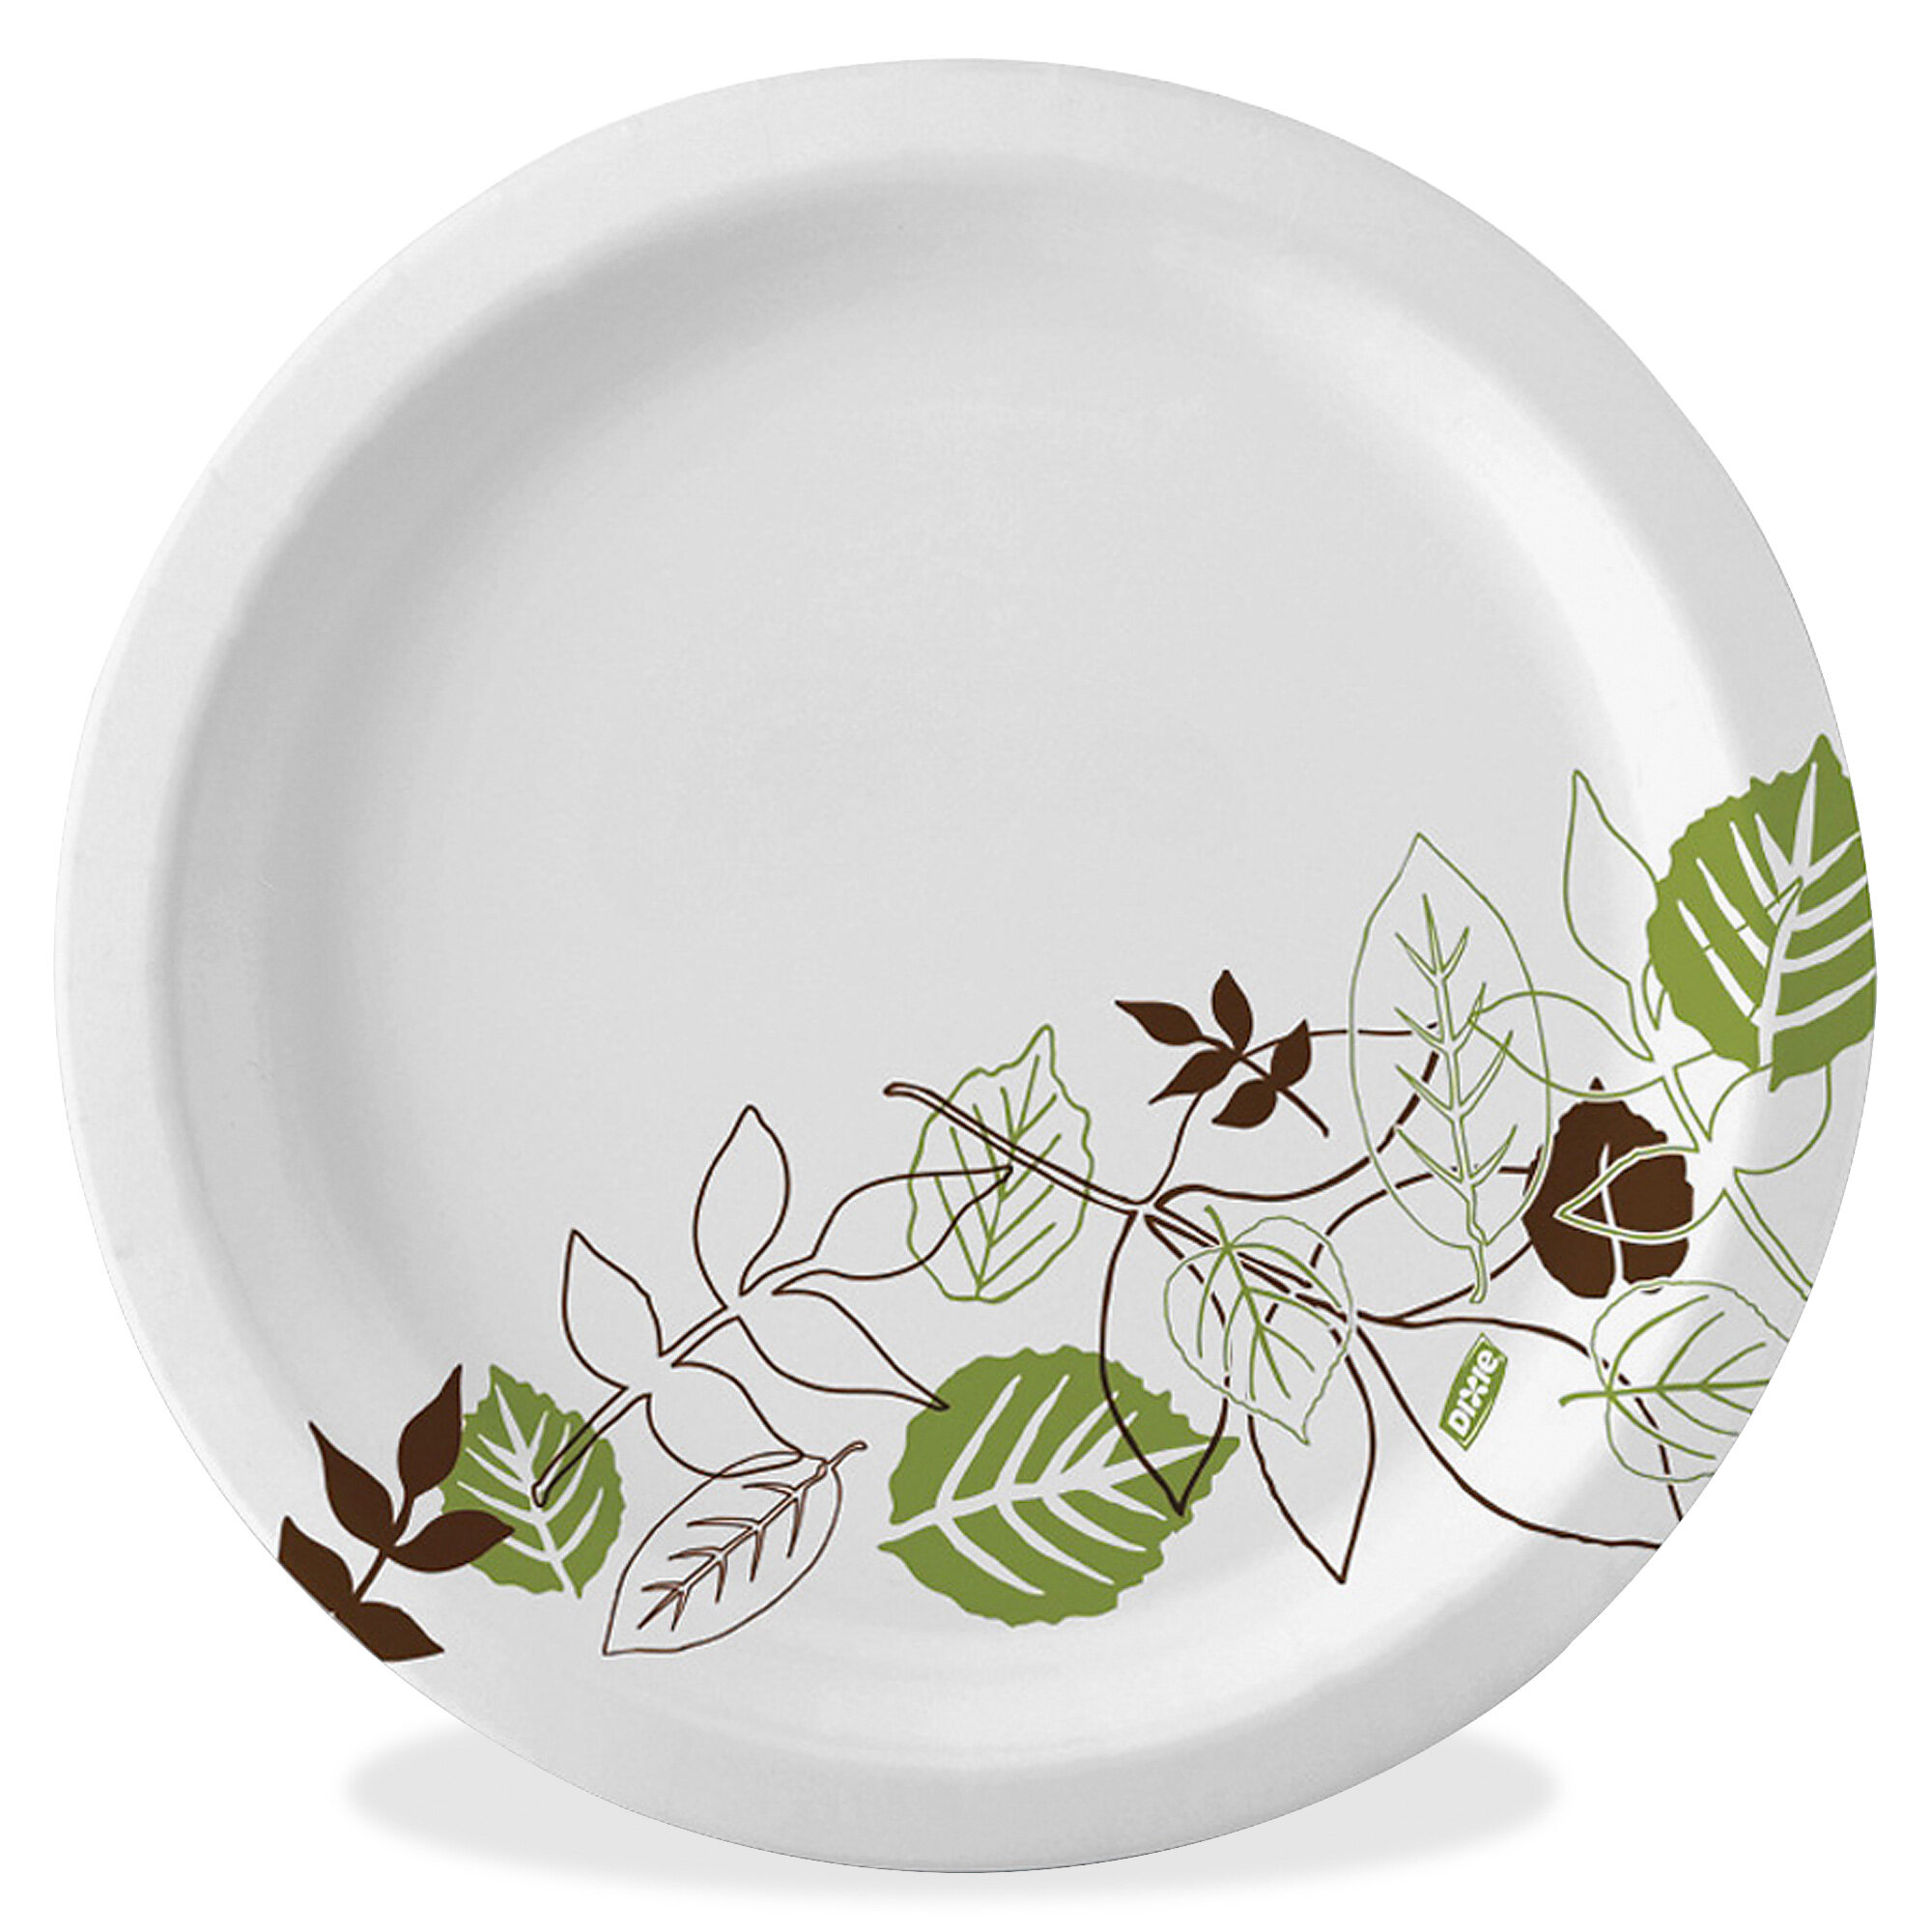 Dixie Ultra Paper Plates, 10 1/16, 20 count, Dinner Size Printed  Disposable Plates (Pack of 2)